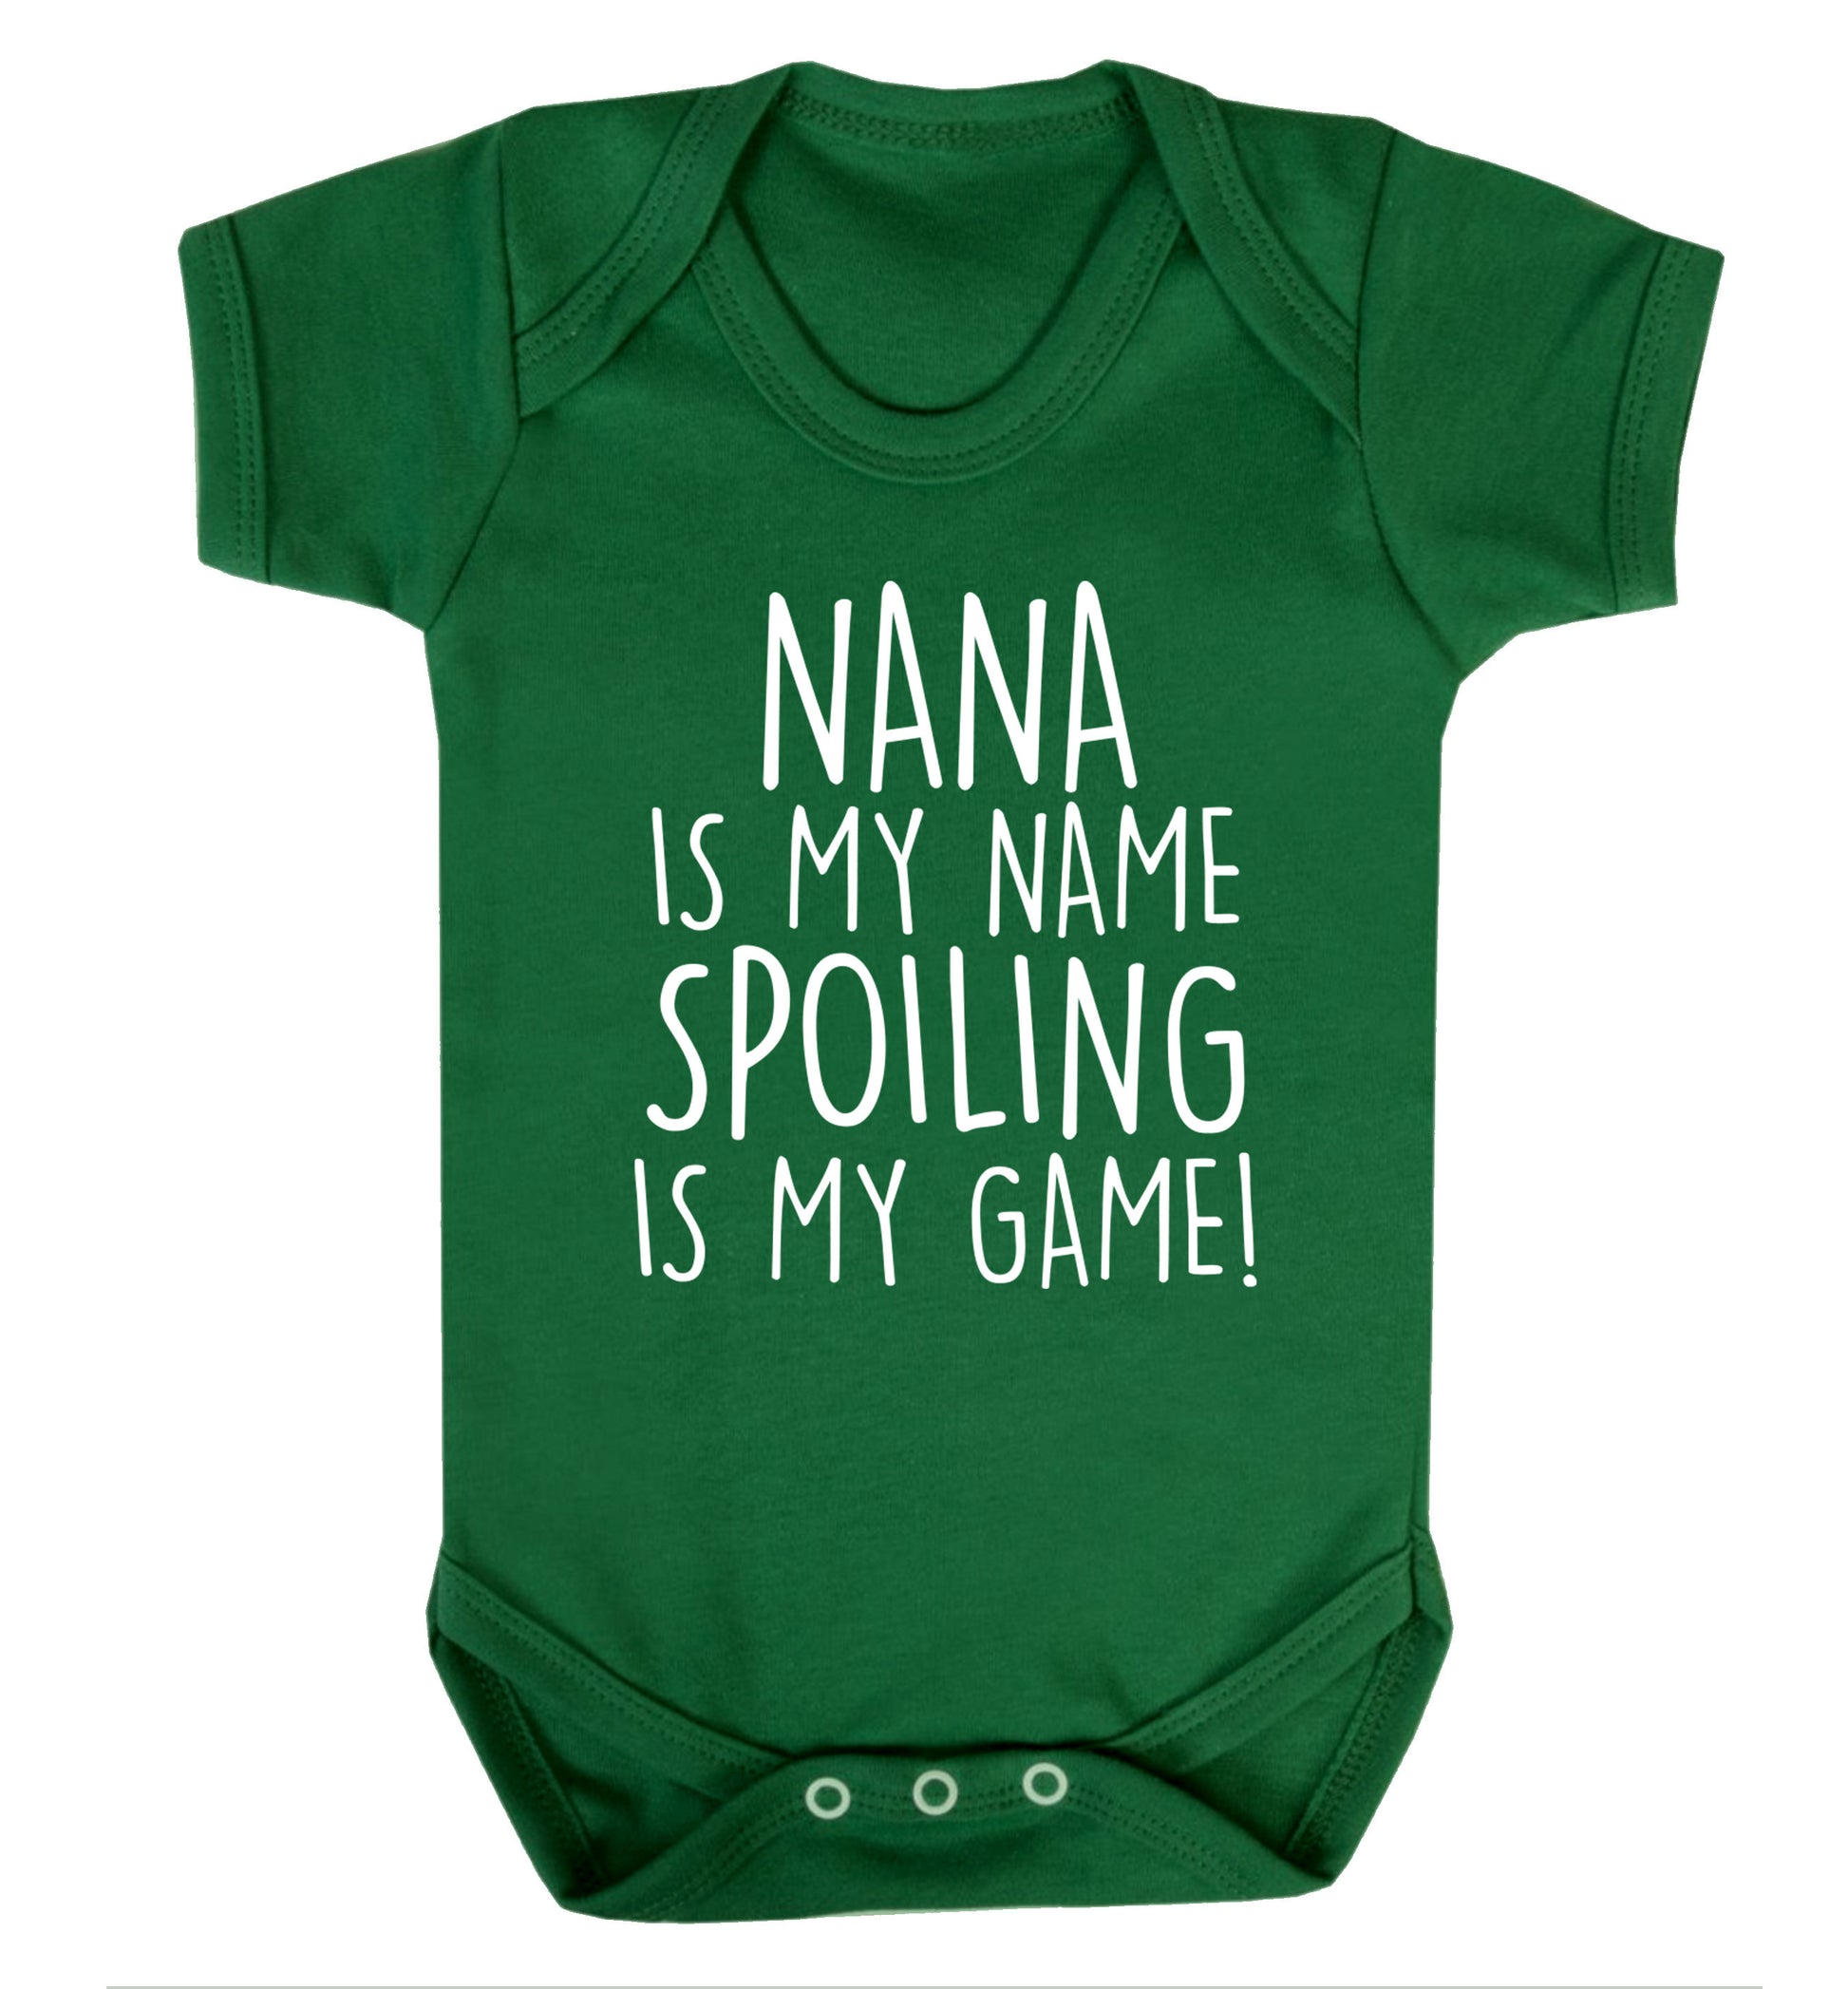 Nana is my name, spoiling is my game Baby Vest green 18-24 months